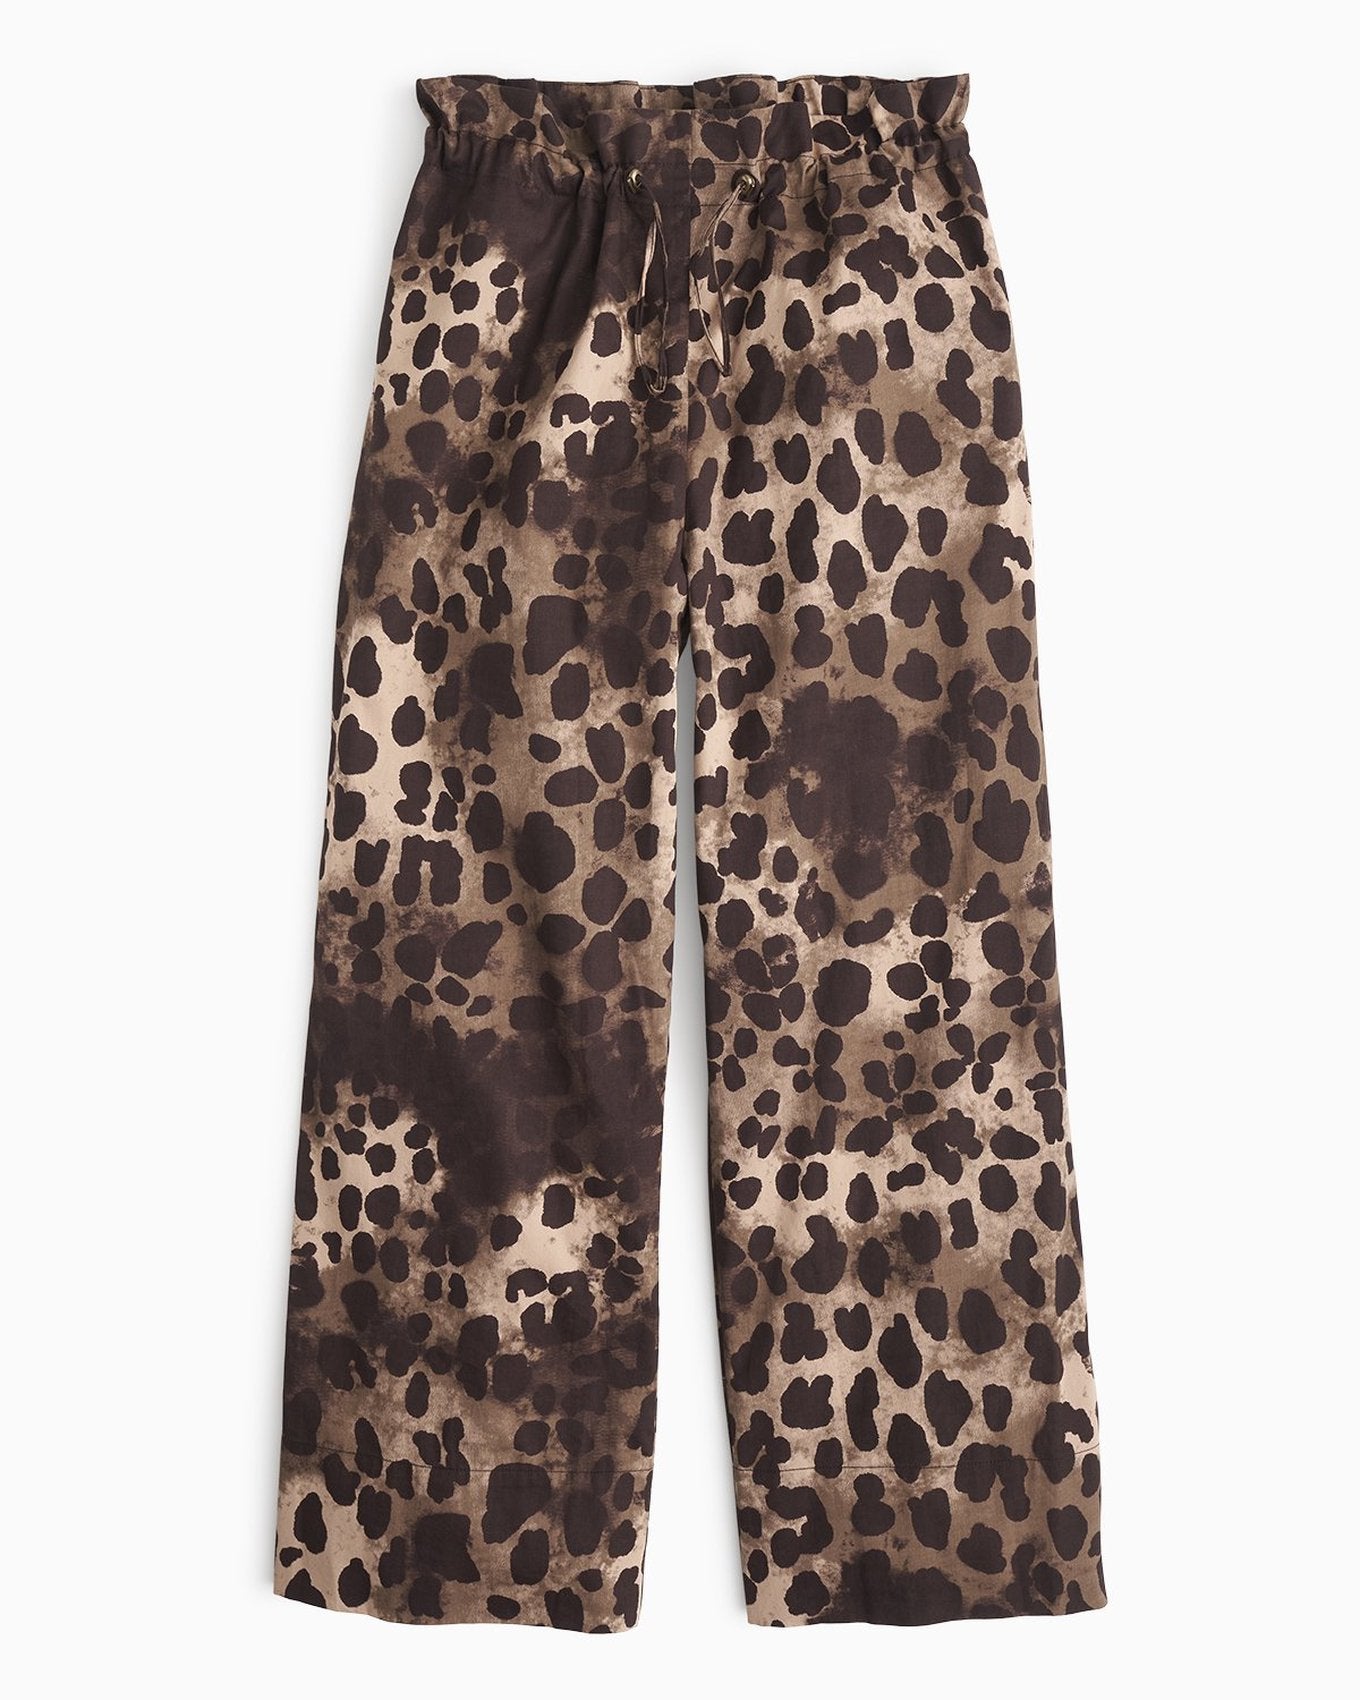 YesAnd Organic Print Paperbag Wide Leg Pant Wide Leg Pant in color Classic Leopard C01 and shape lounge pant